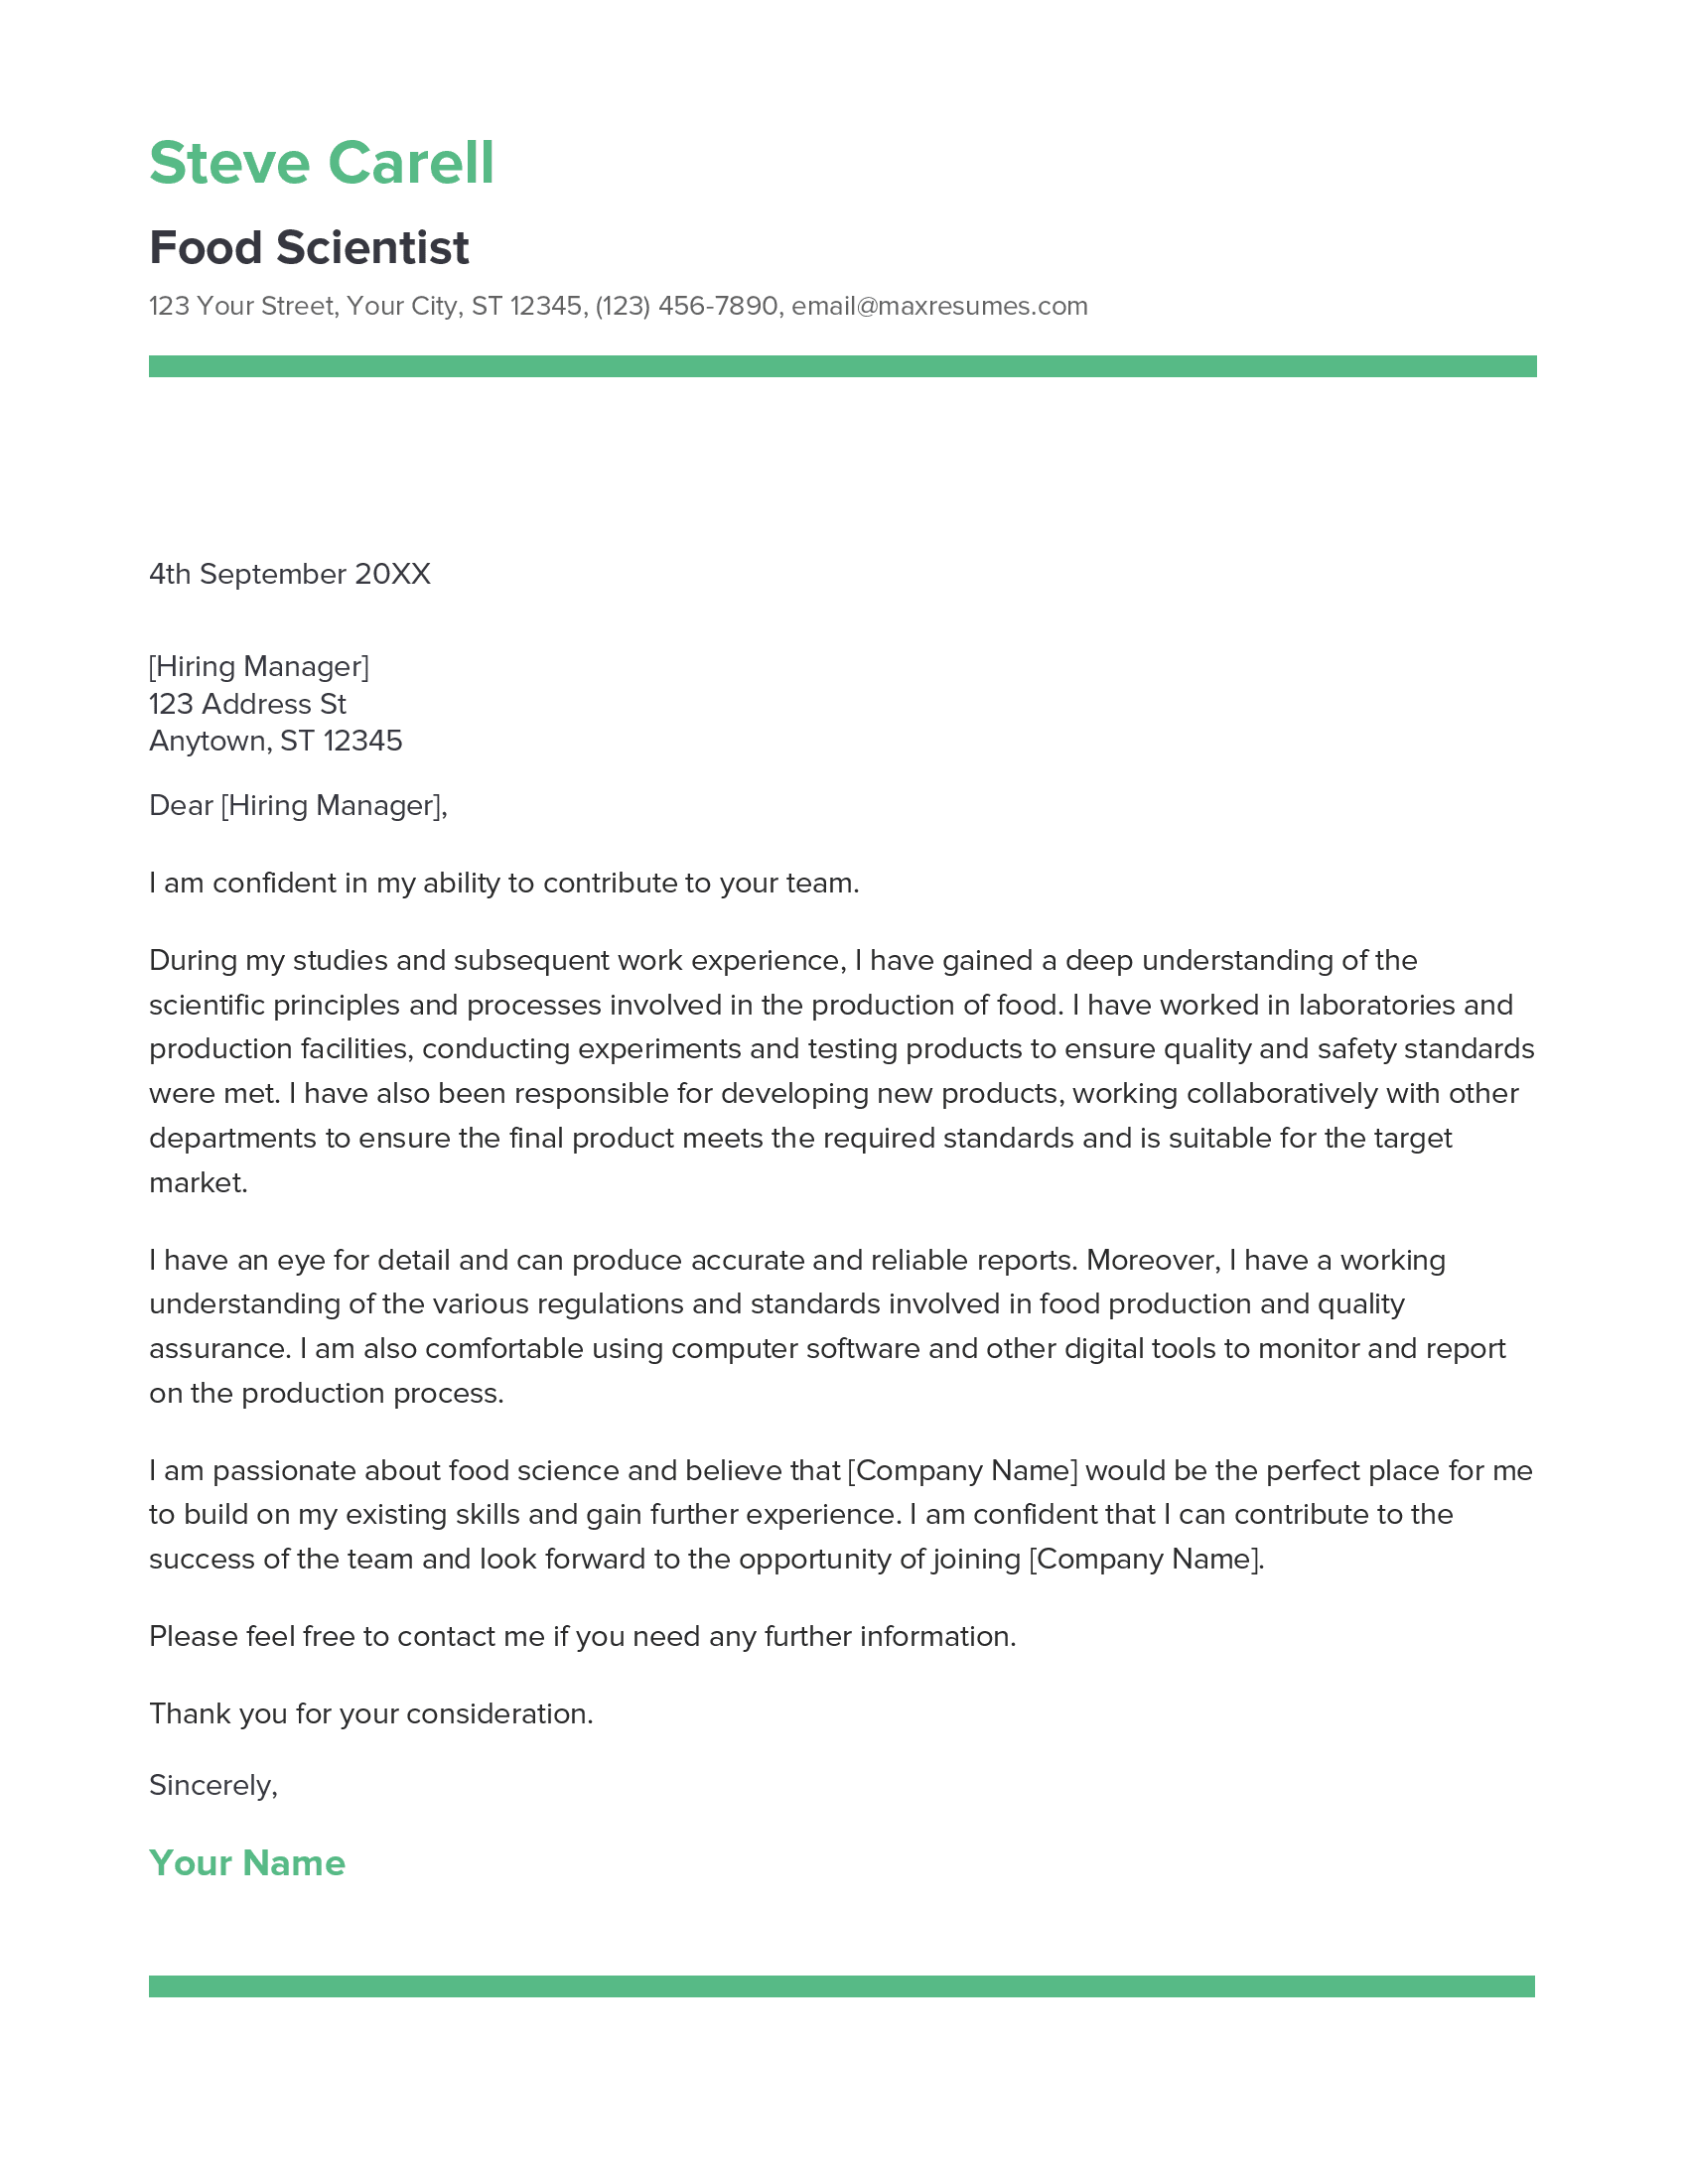 Food Scientist Cover Letter Example